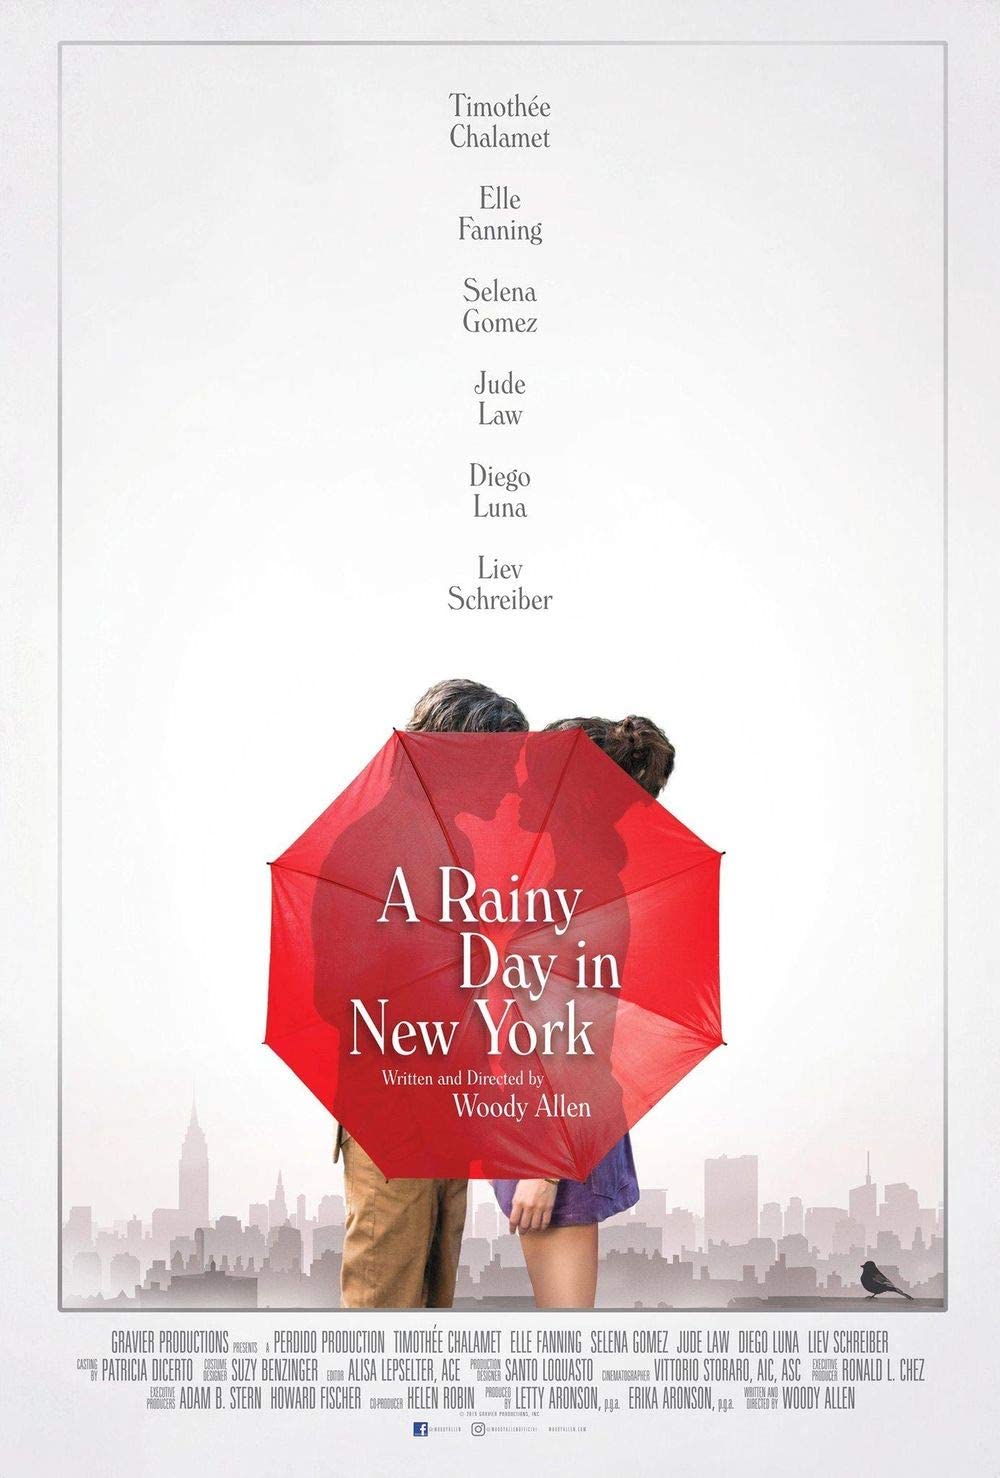 FOX MOVIES: A RAINY DAY IN NEW YORK